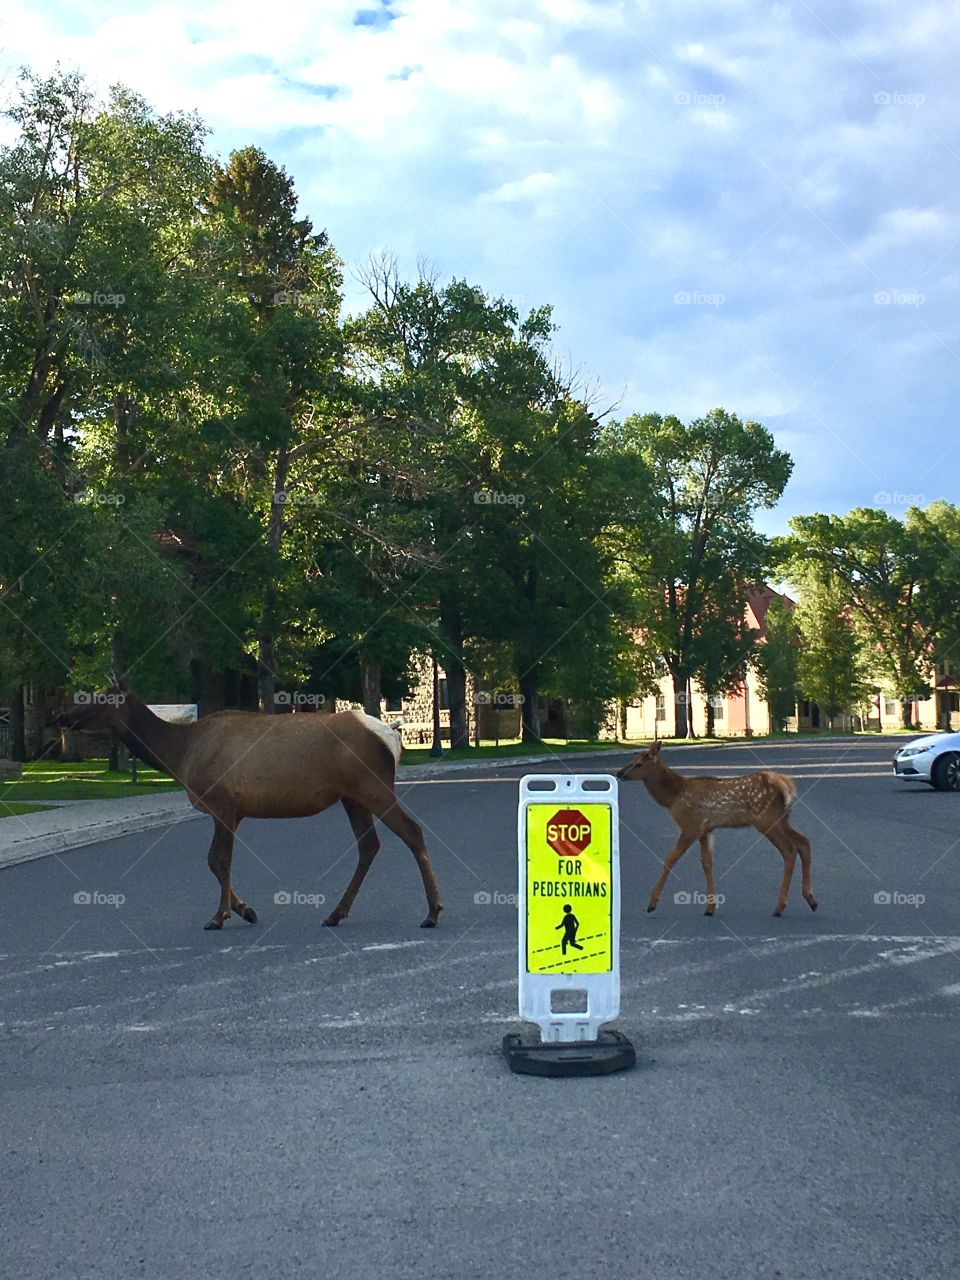 An Elk and her calf, just obeying road rules in Yellowstone National Park, USA